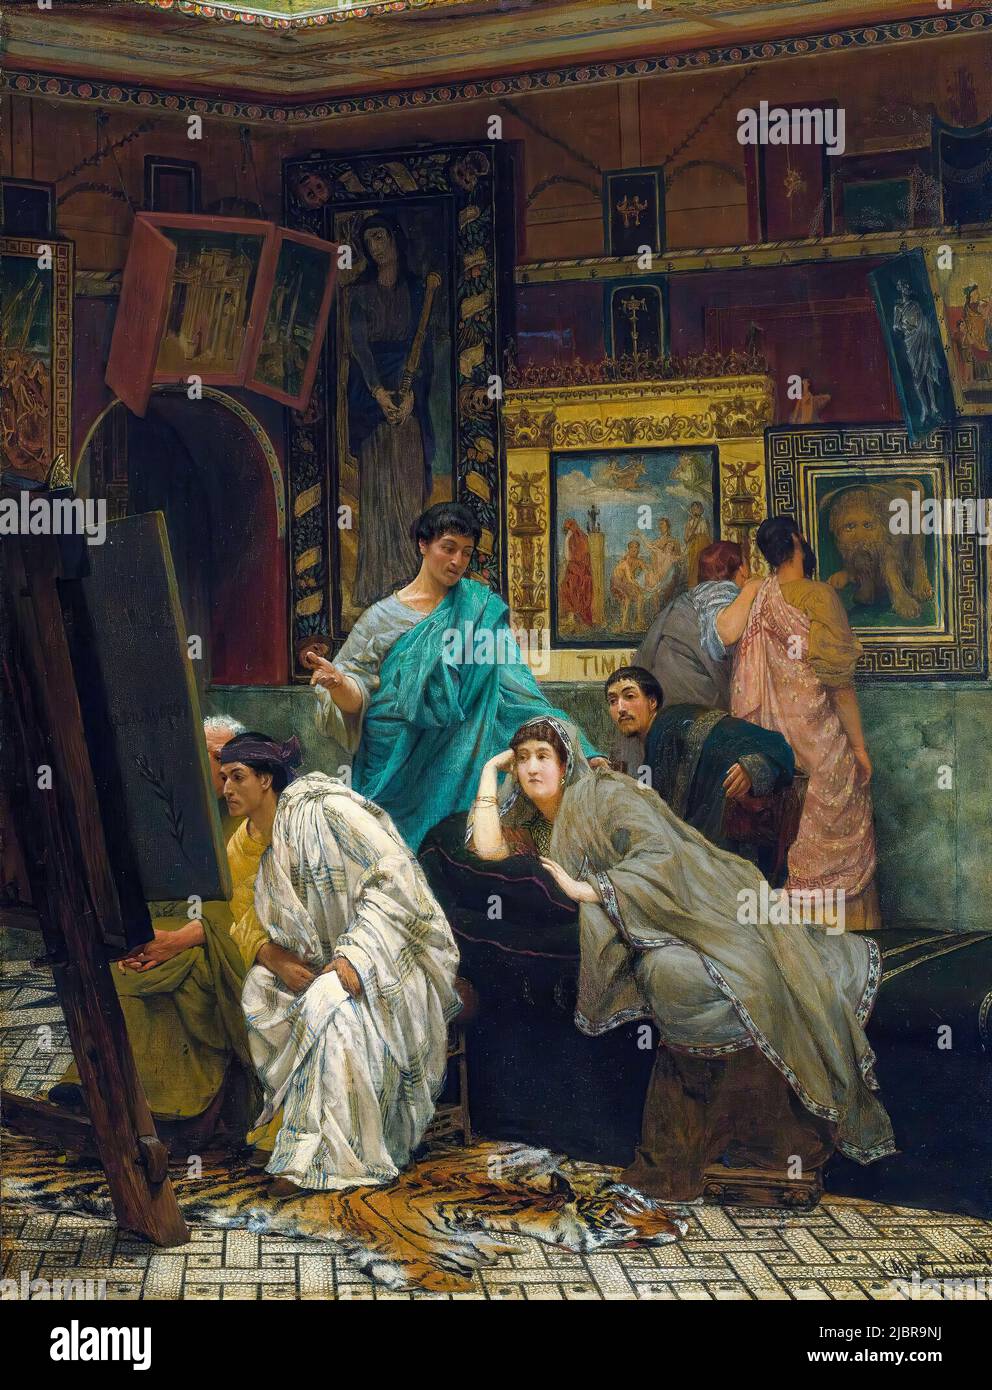 Sir Lawrence Alma Tadema, Collector of Pictures at the Time of Augustus, dipinge in olio su tela, 1867 Foto Stock